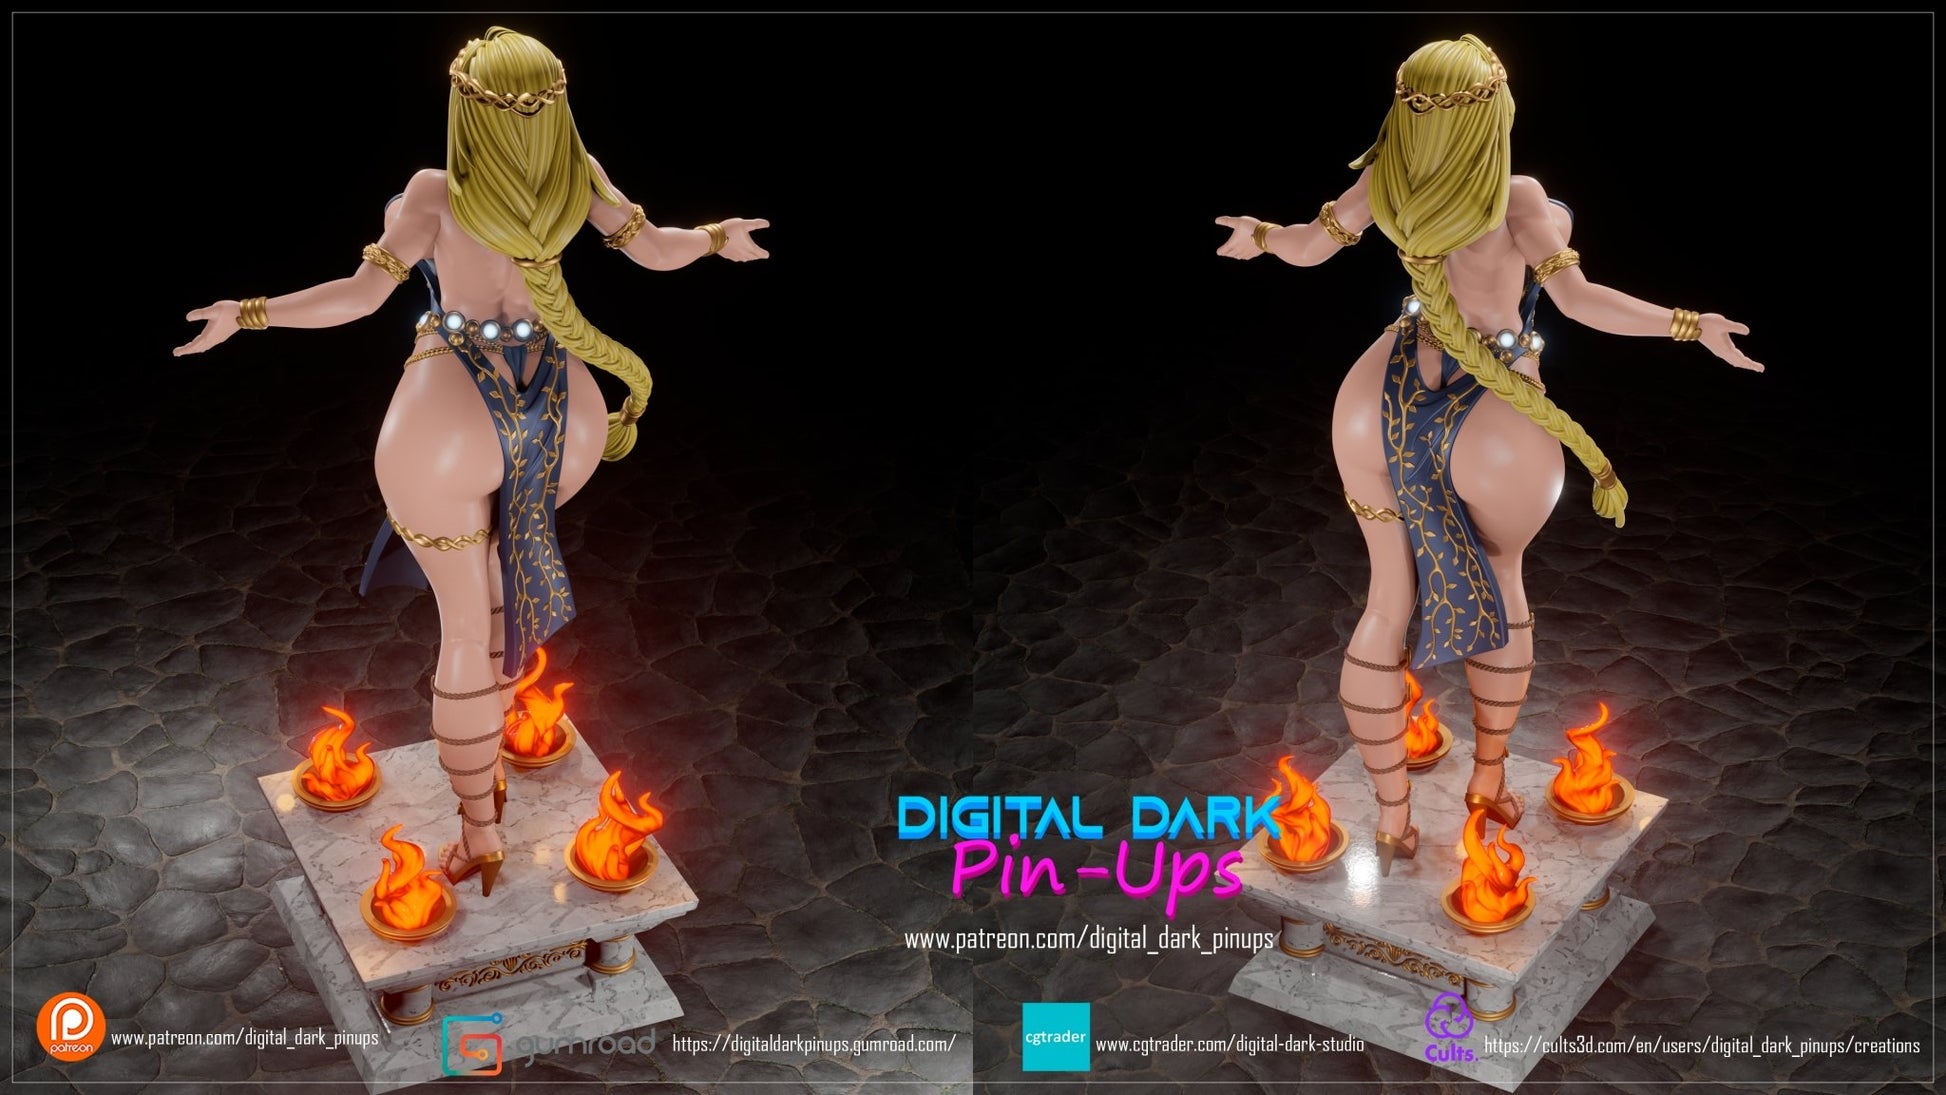 Queen Marika 3D Printed Miniature FunArt by Digital Dark Pin-Ups Scaled Collectables Statues & Figurines